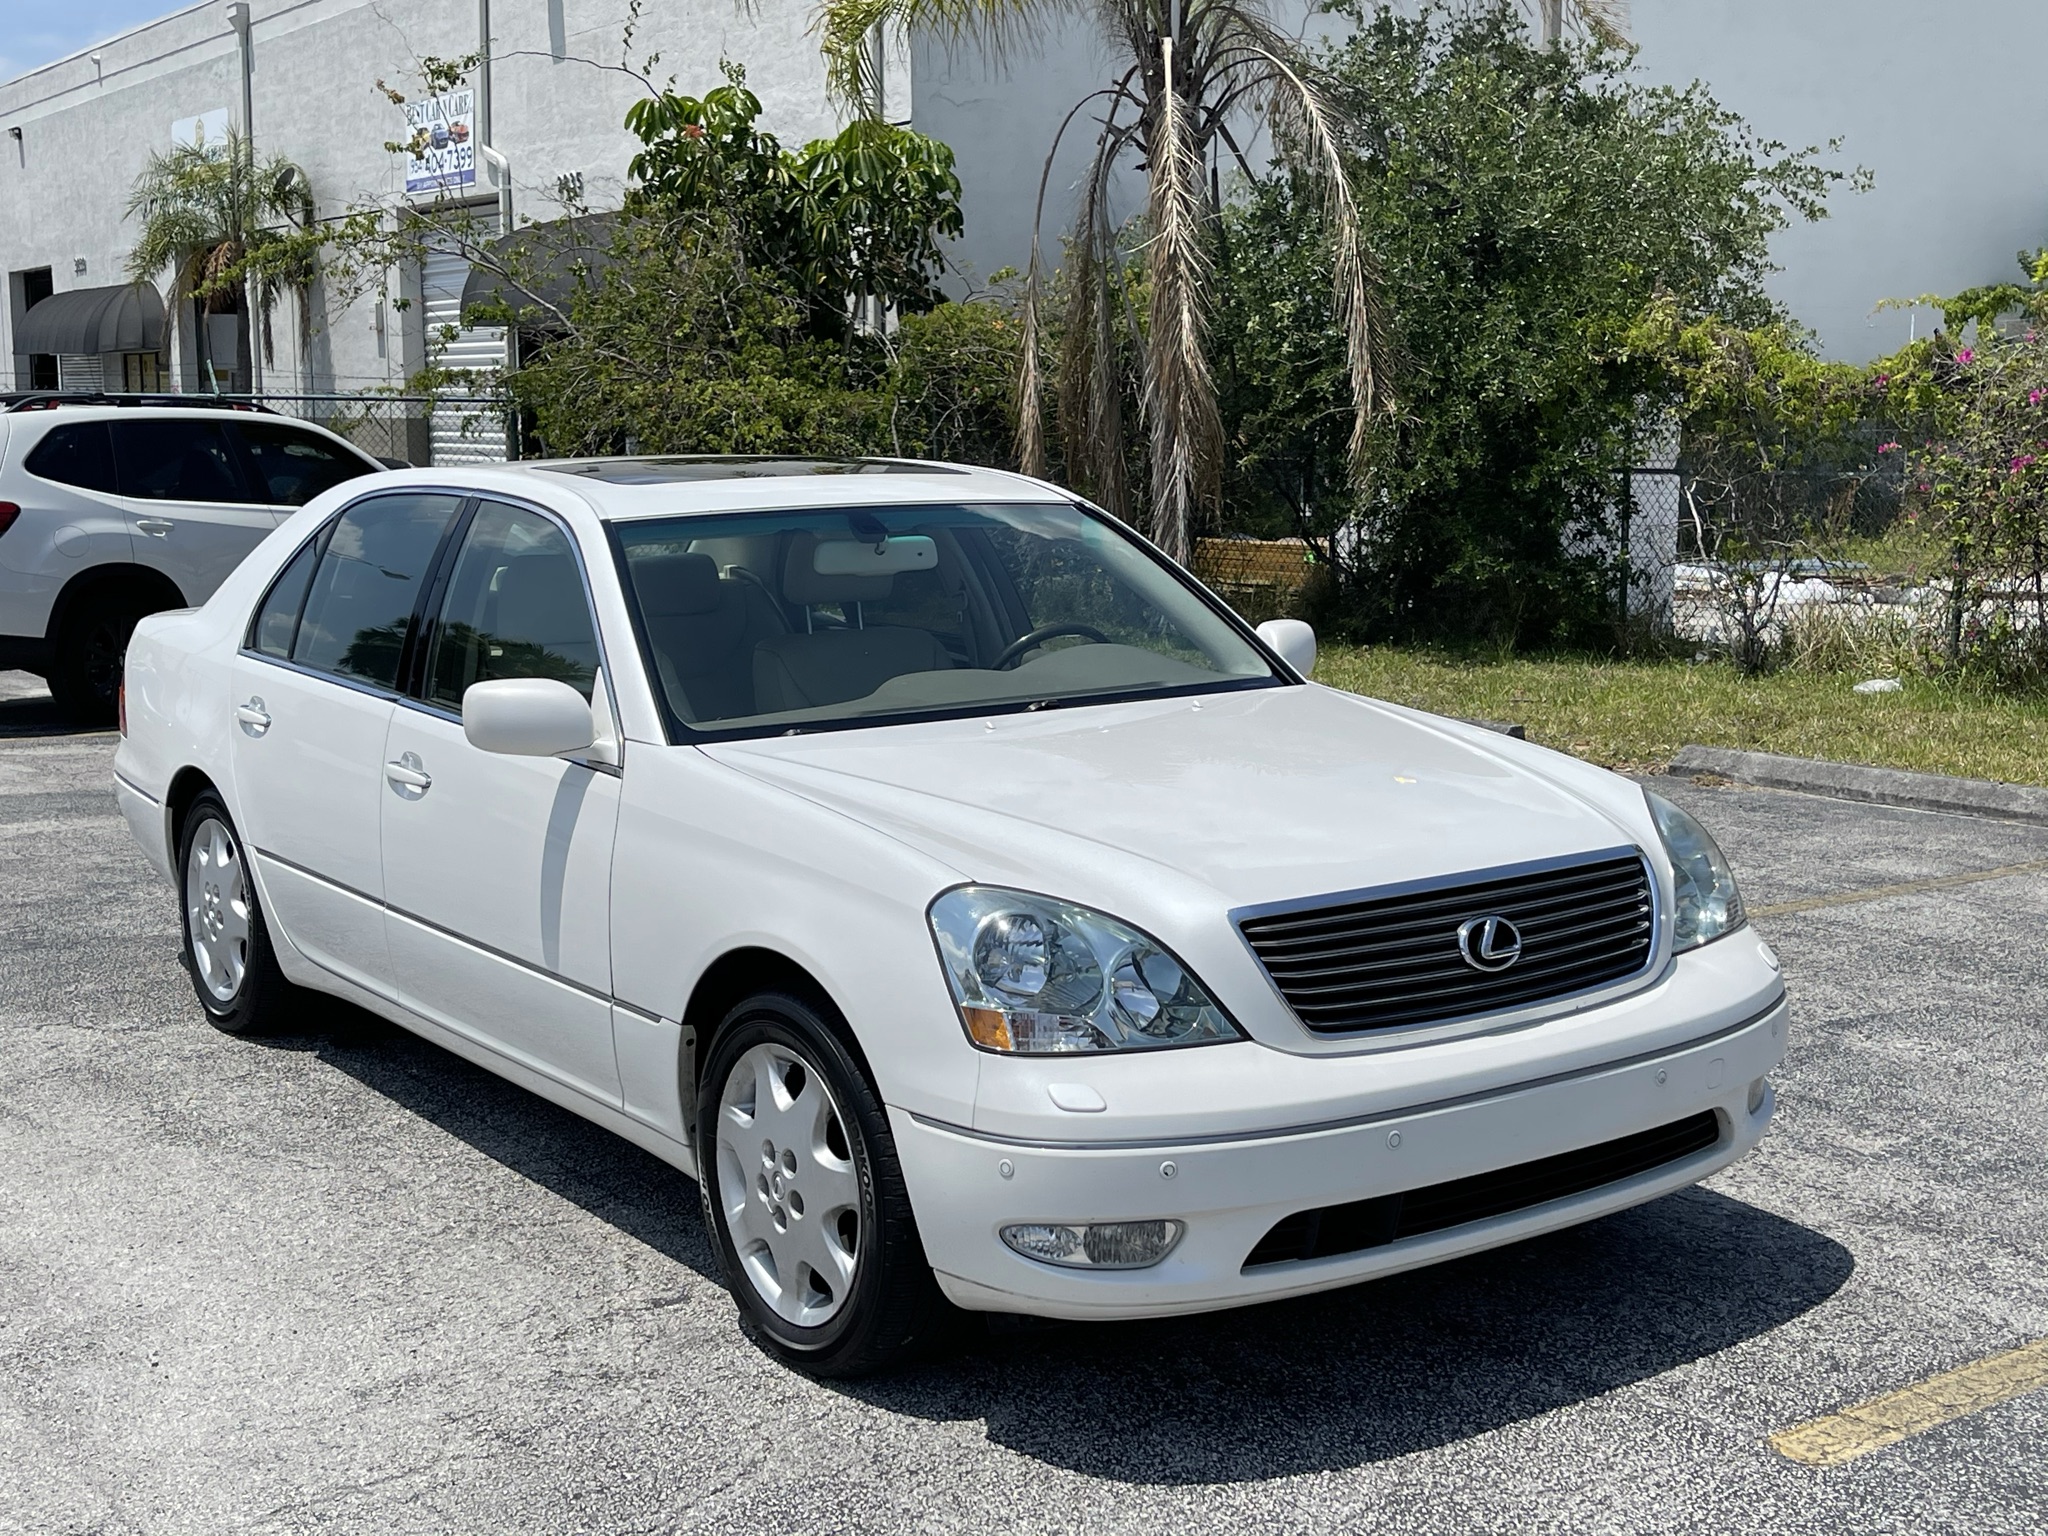 Buy Used 2001 LEXUS LS430 ULTRA LUXURY for $9 900 from trusted dealer in  Brooklyn, NY!